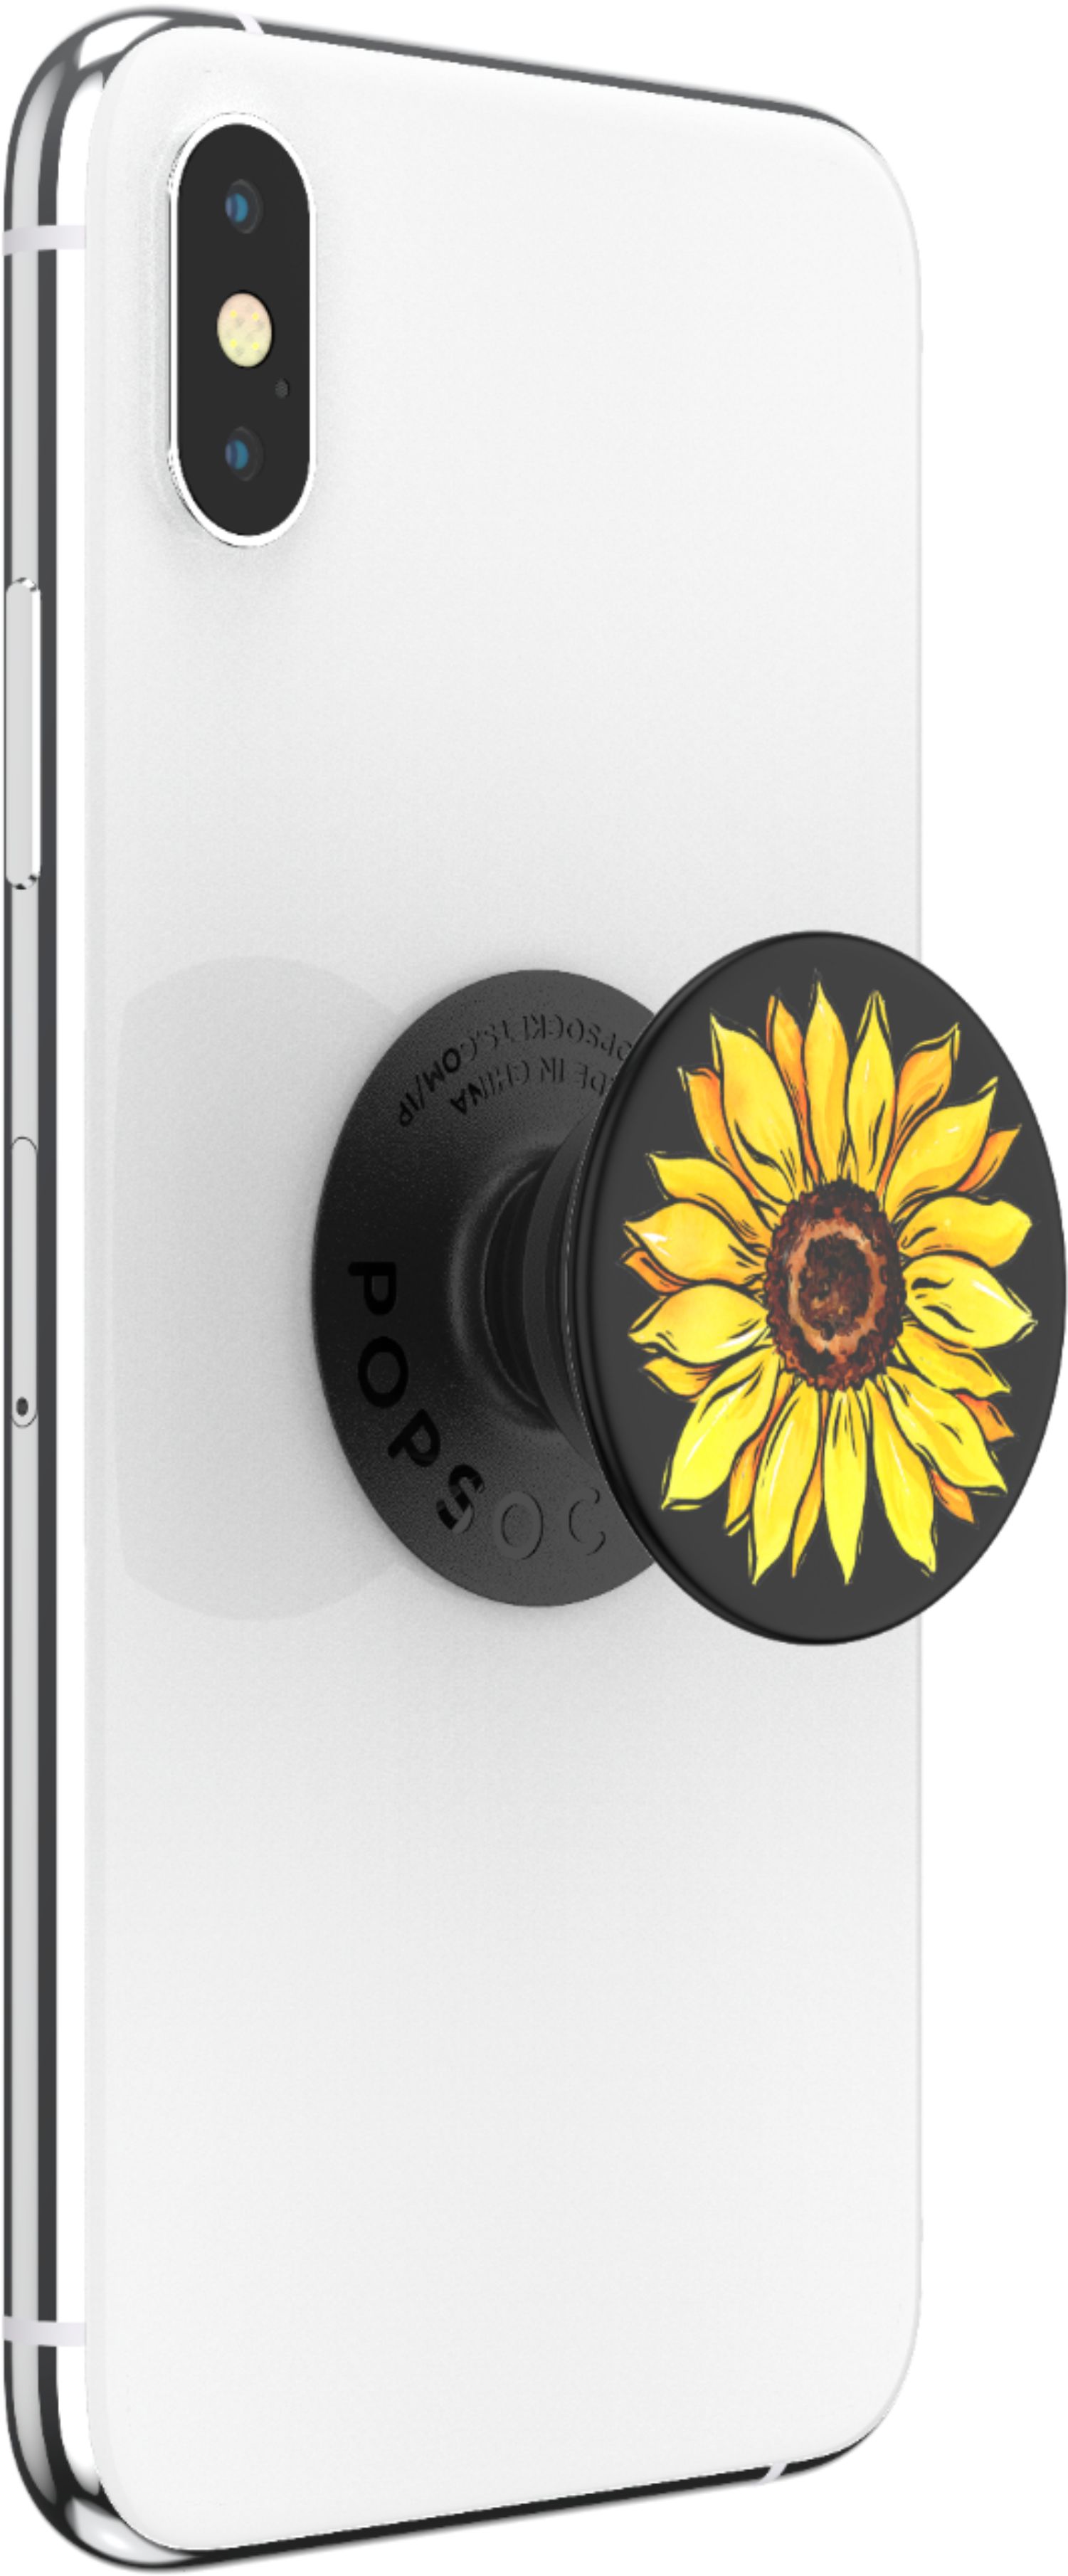  Pepperoni Pizza popsocket PopSockets PopGrip: Swappable Grip  for Phones & Tablets : Cell Phones & Accessories